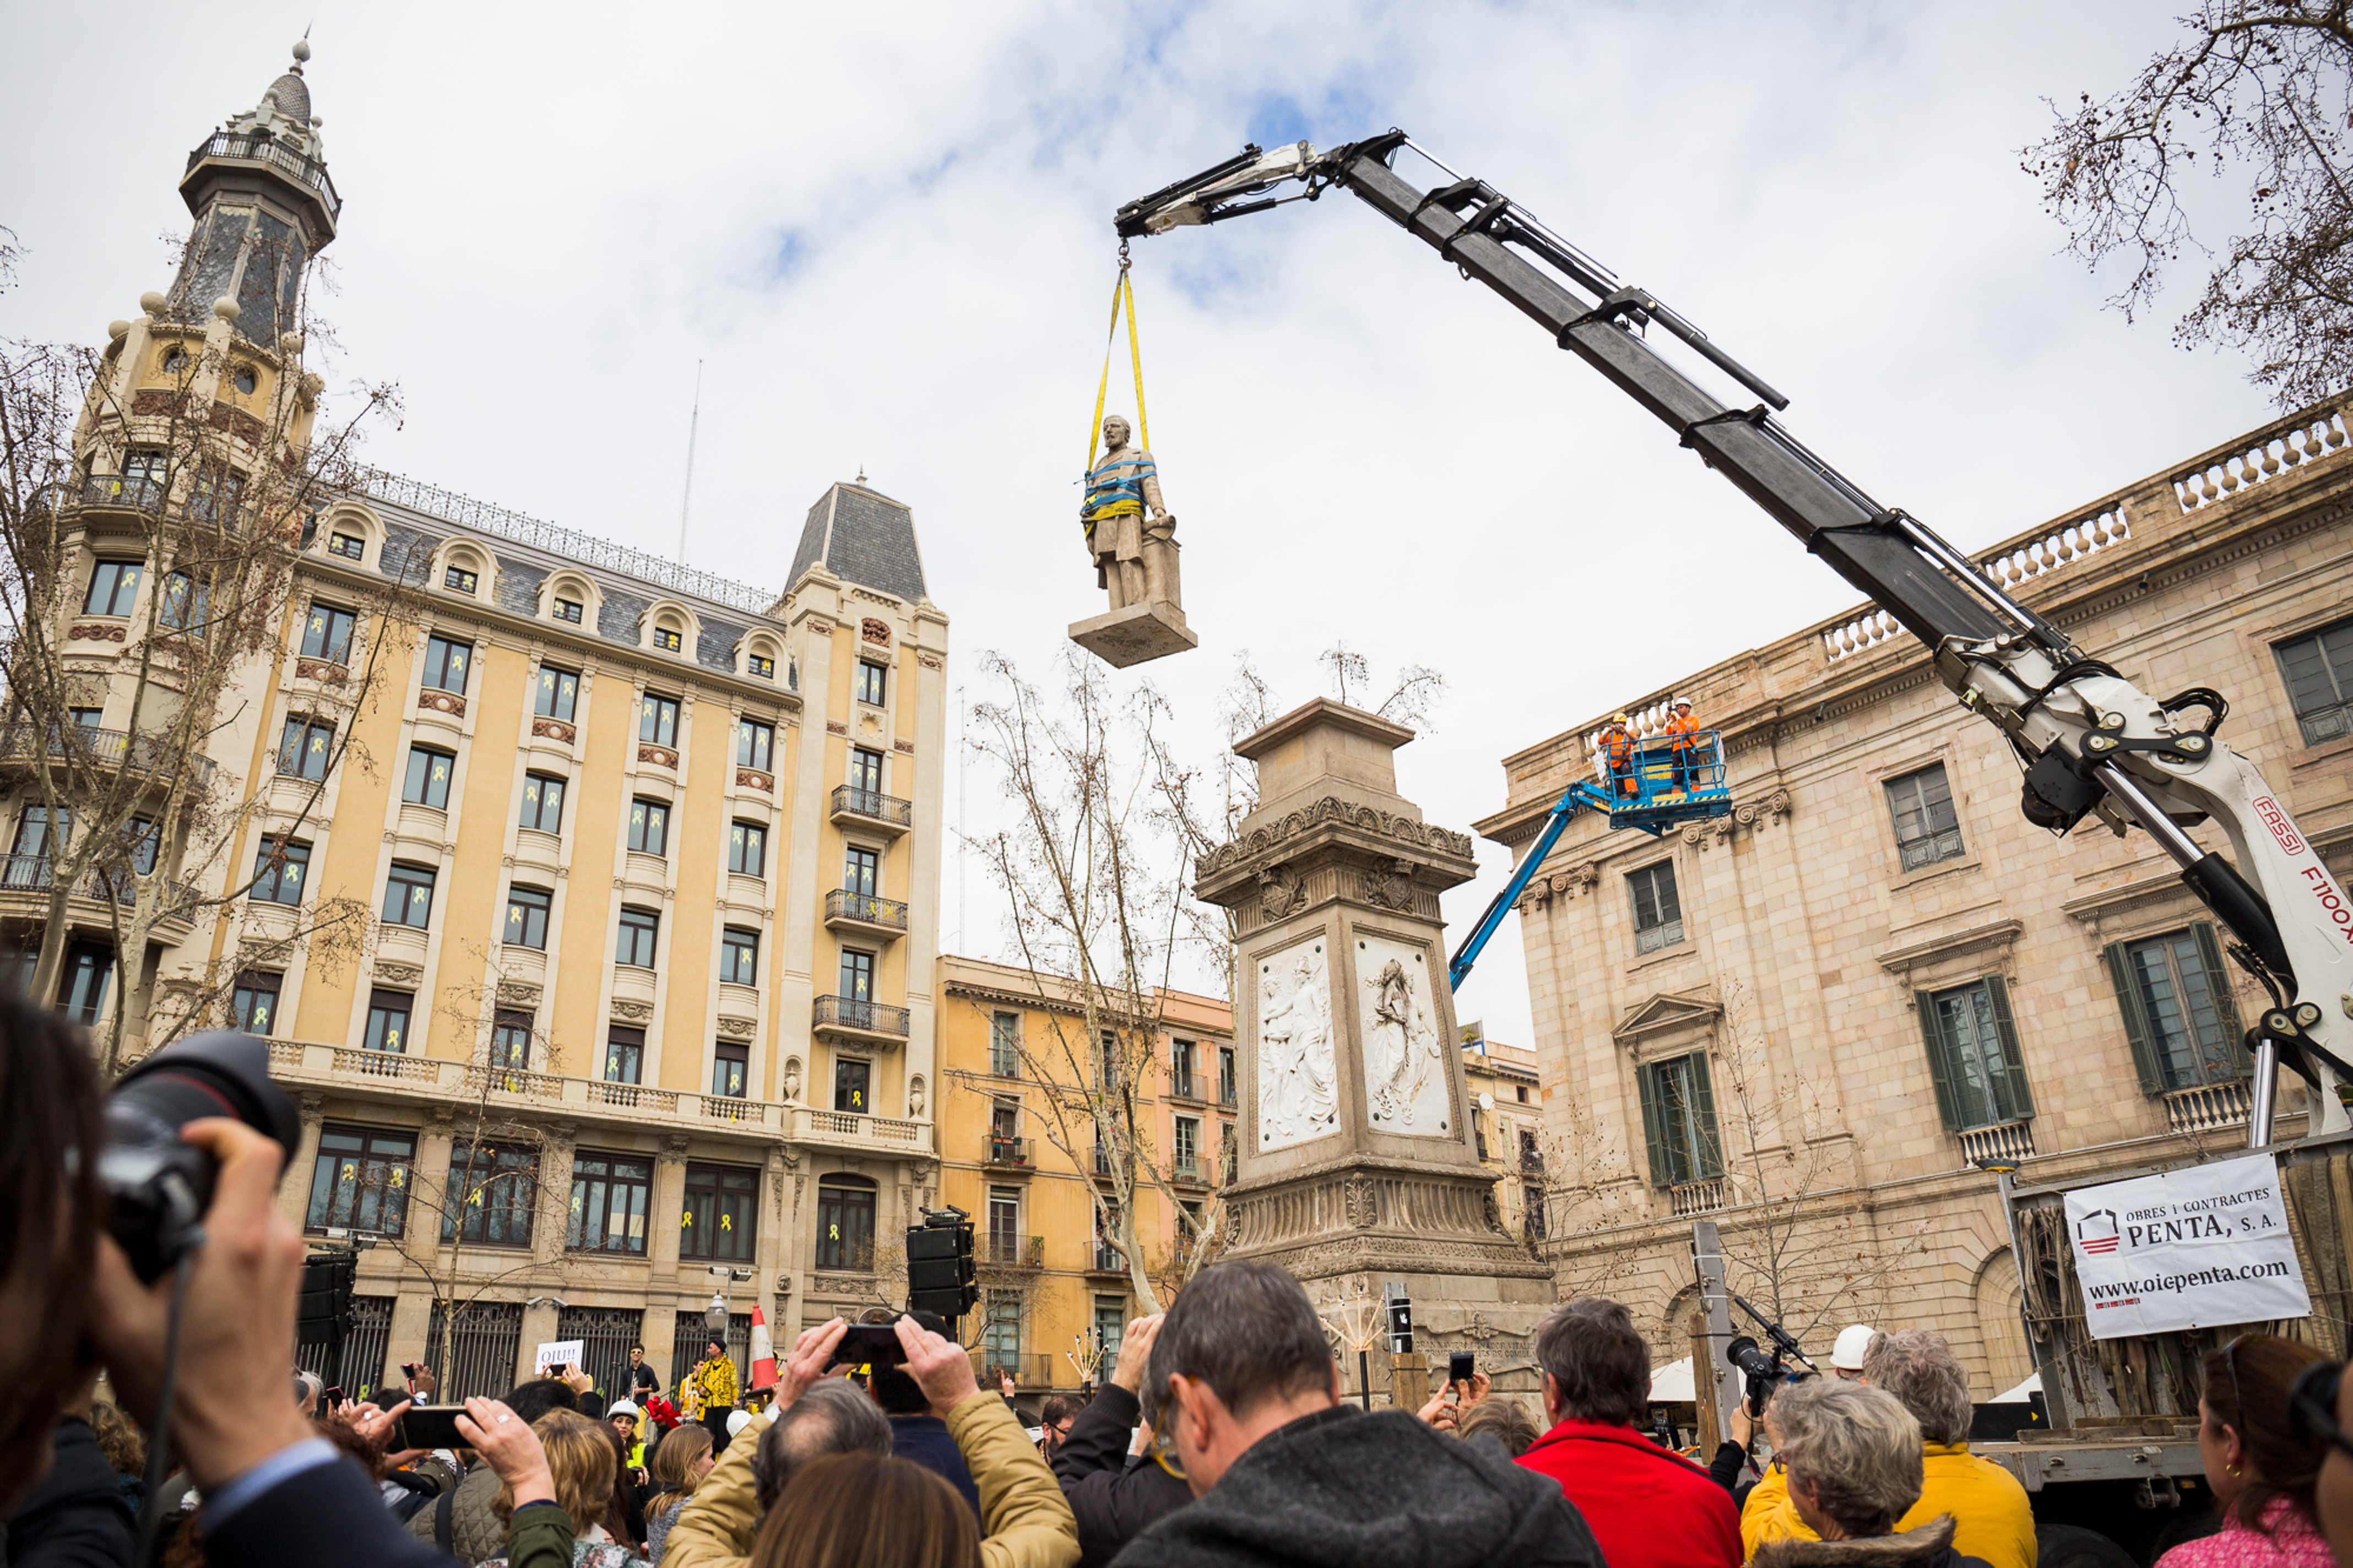 A crane removing the statue of Antonio López i López in Barcelona on March 4 2018 (photo from the Barcelona City Hall)